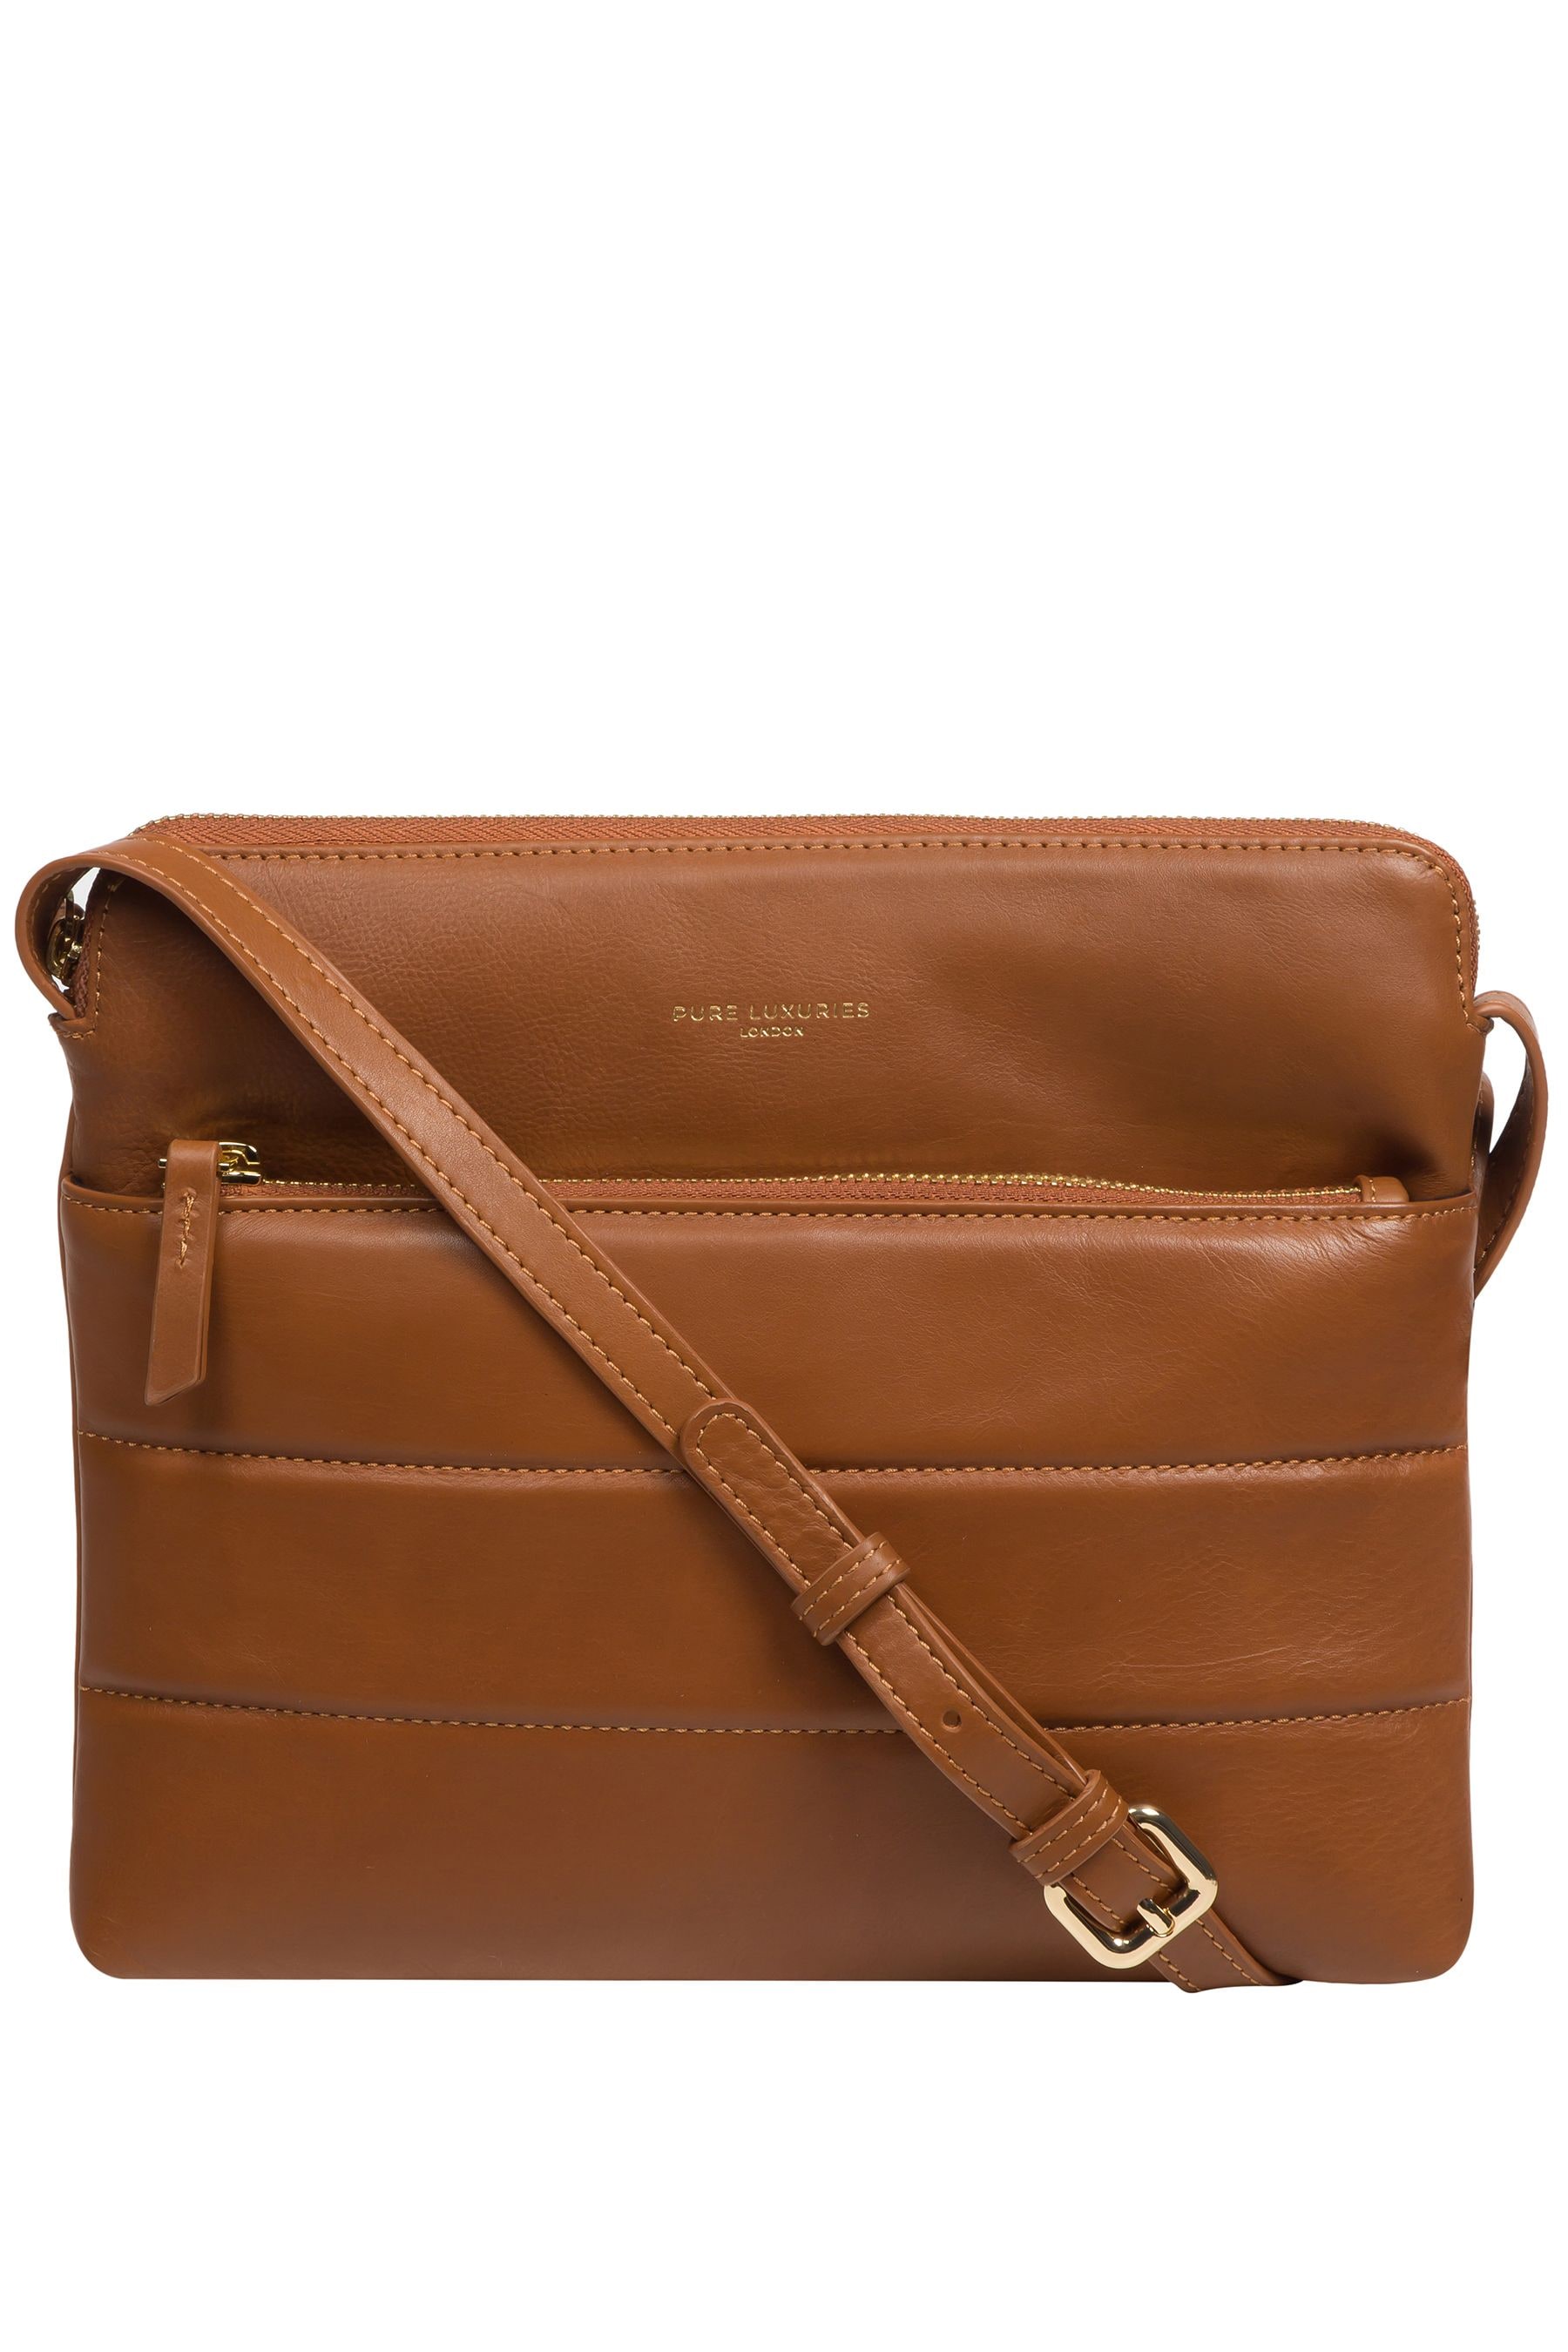 Buy Pure Luxuries London Finola Nappa Leather Cross-Body Bag from the ...